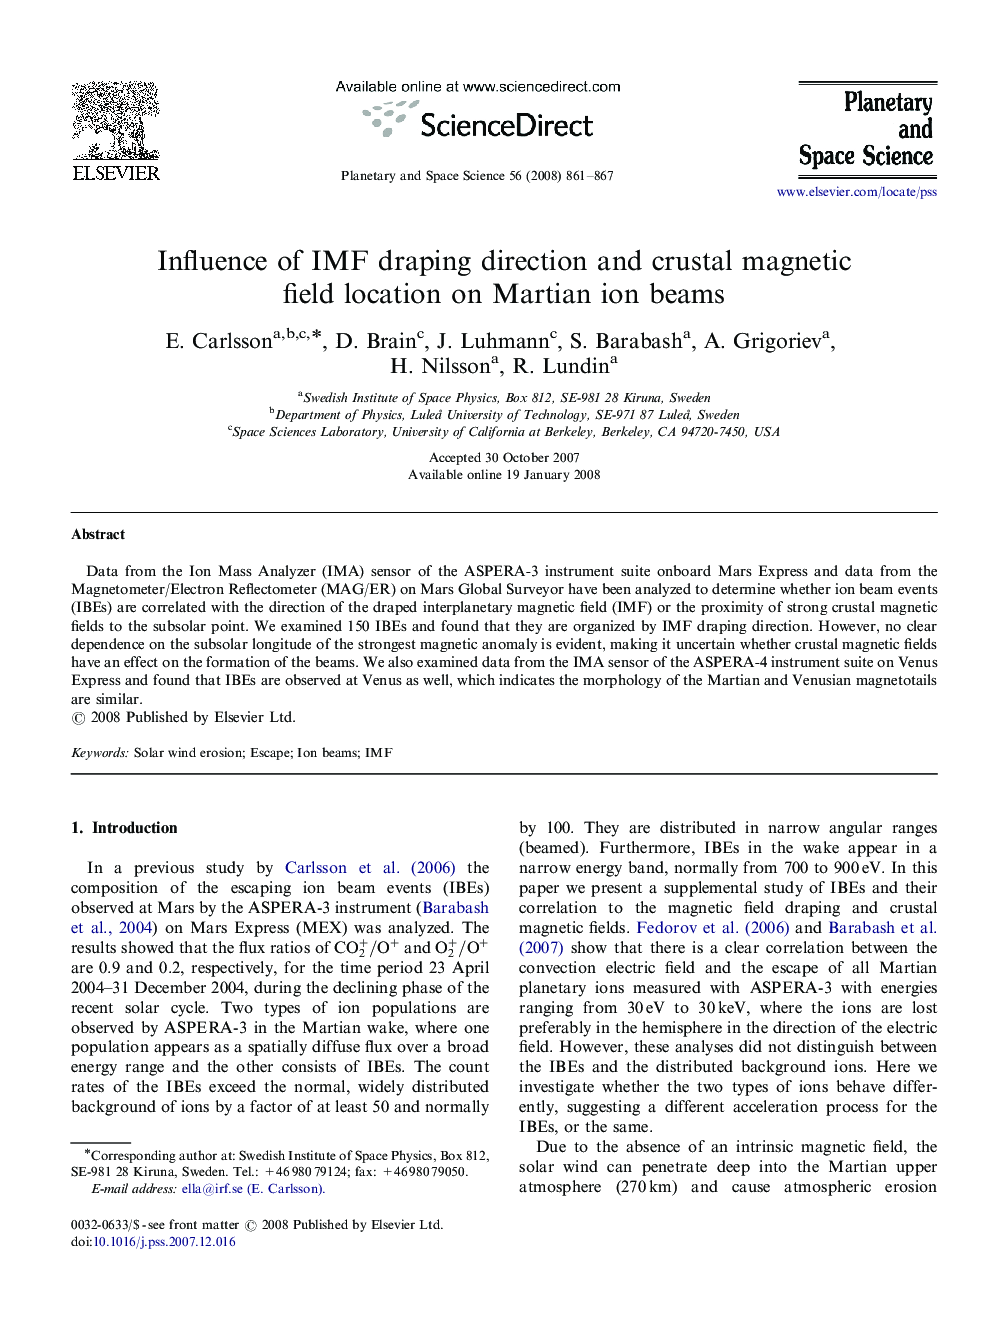 Influence of IMF draping direction and crustal magnetic field location on Martian ion beams